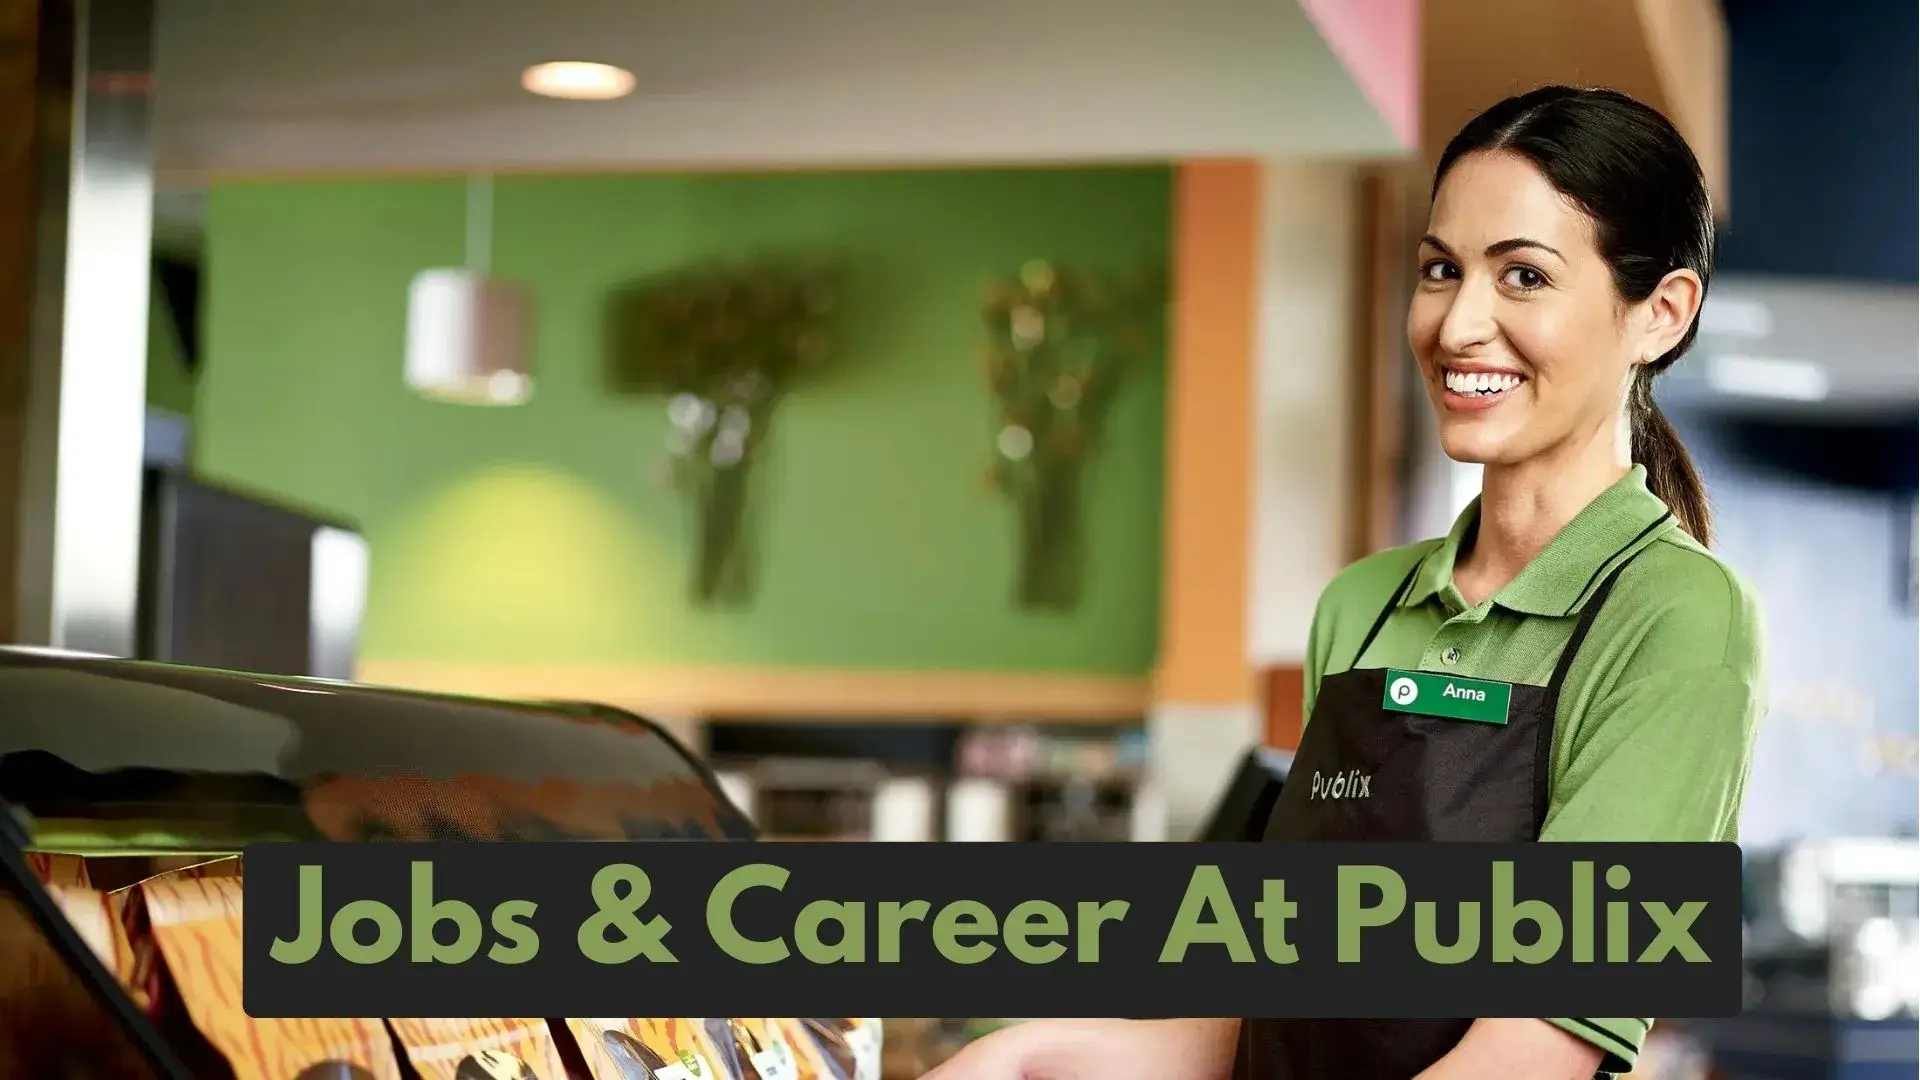 Looking For Publix Careers And Jobs – Know This Before